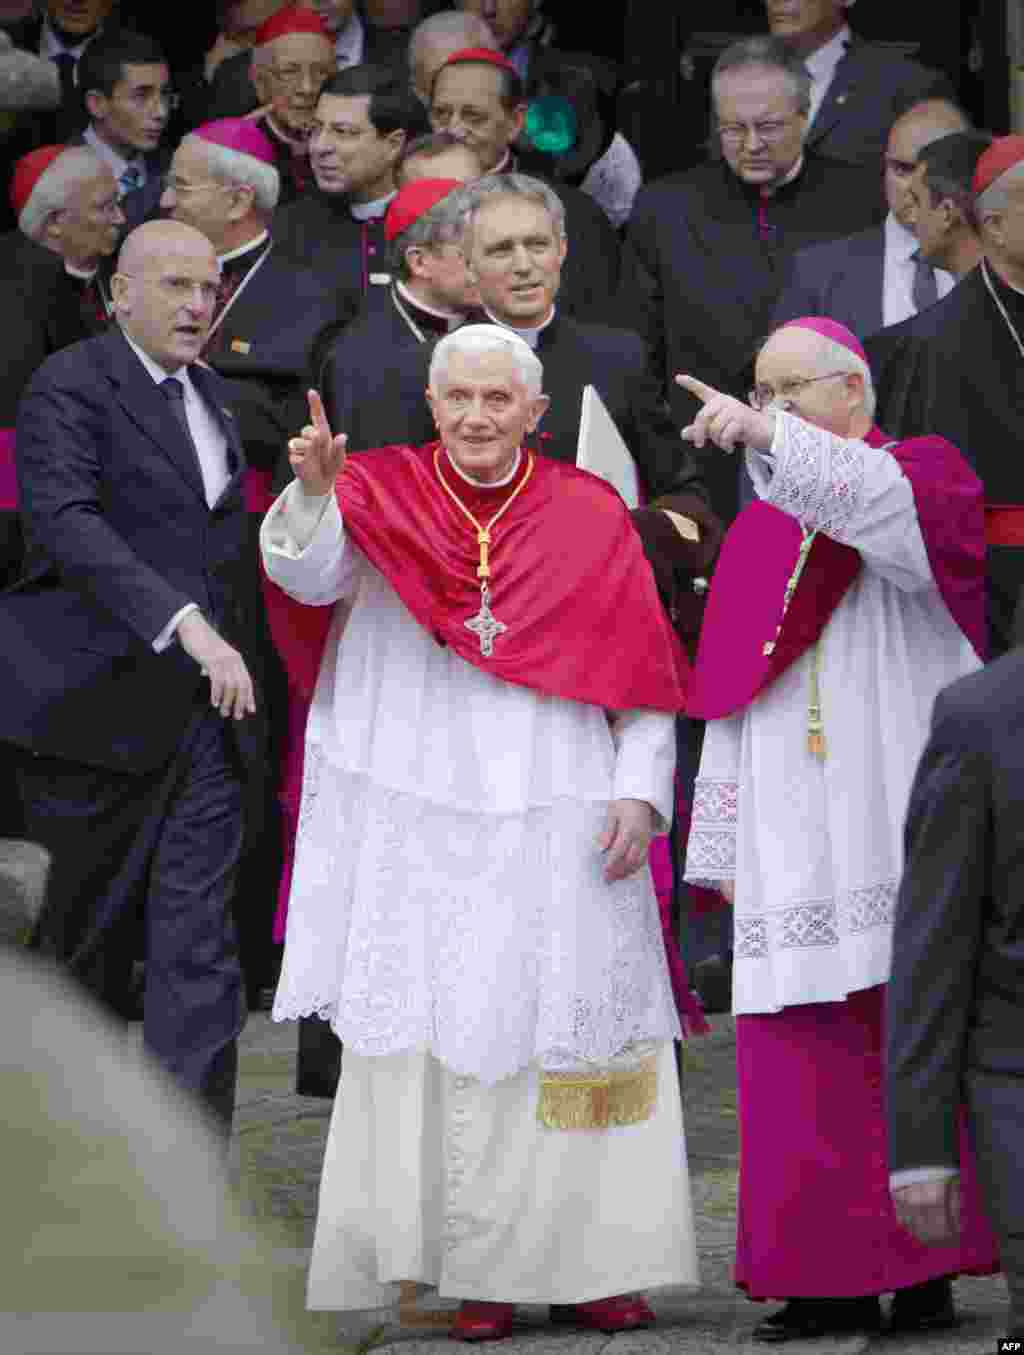 Pope Benedict XVI, center, talks to Julian Barrio, Archbishop of Santiago de Compostela, right, as the Pope arrives to the Cathedral in Santiago de Compostela, northern Spain, on Saturday, Nov. 6, 2010. The Pope visits the pilgrimage city of Santiago de C